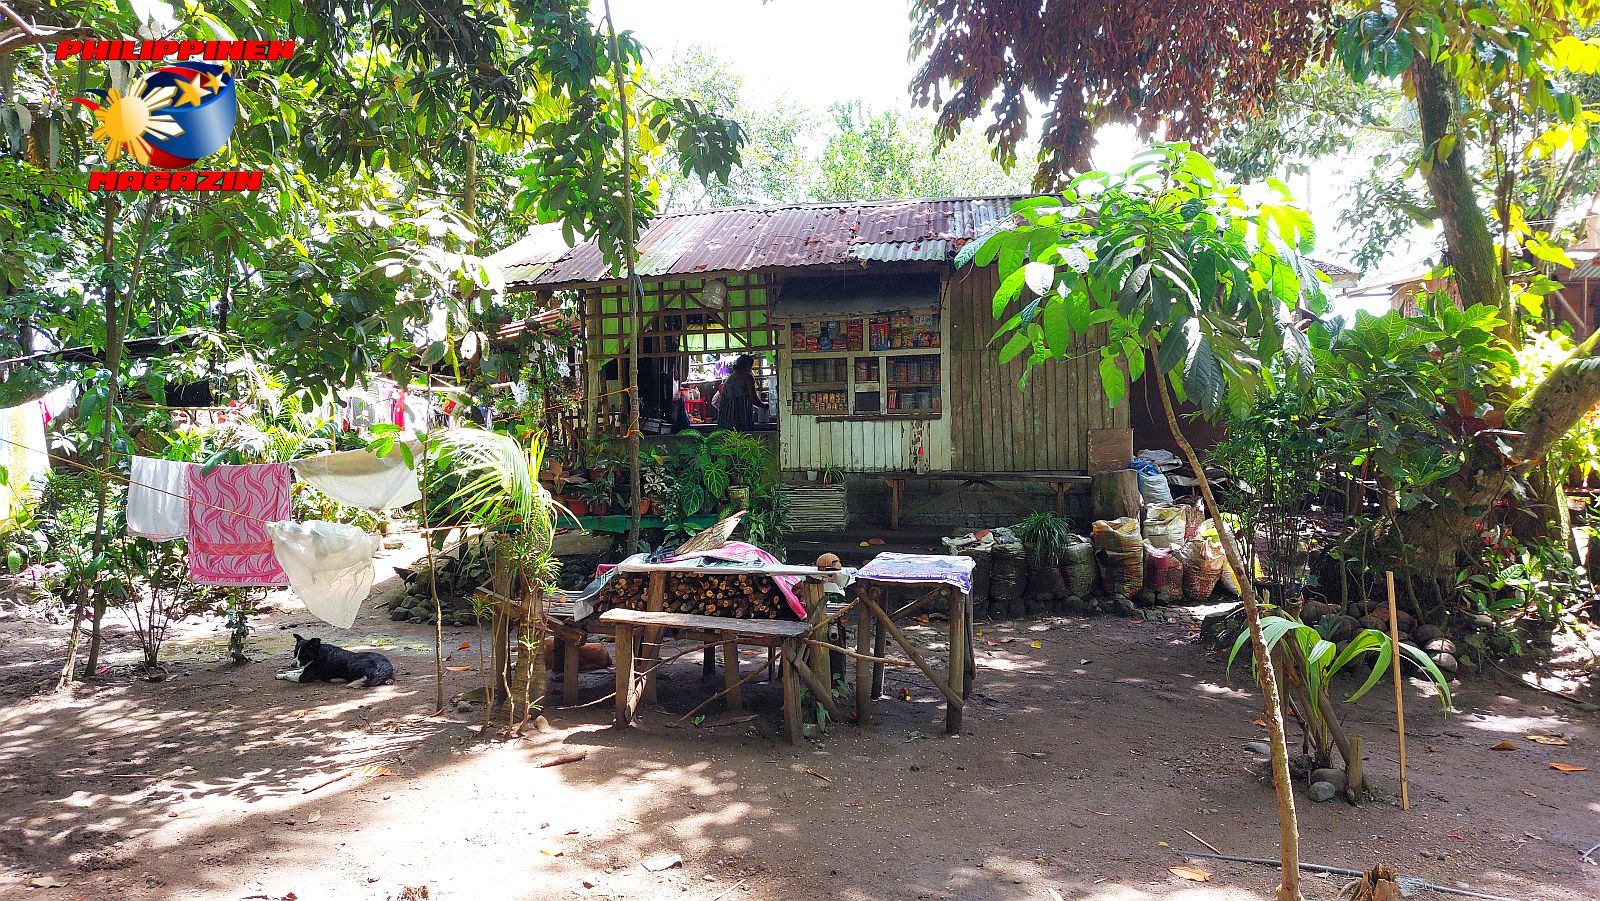 SIGHTS OF CAGAYAN DE ORO CITY & NORTHERN MINDANAO - IMAGE OF THE DAY: Small Shop in the Rice Field Settlement